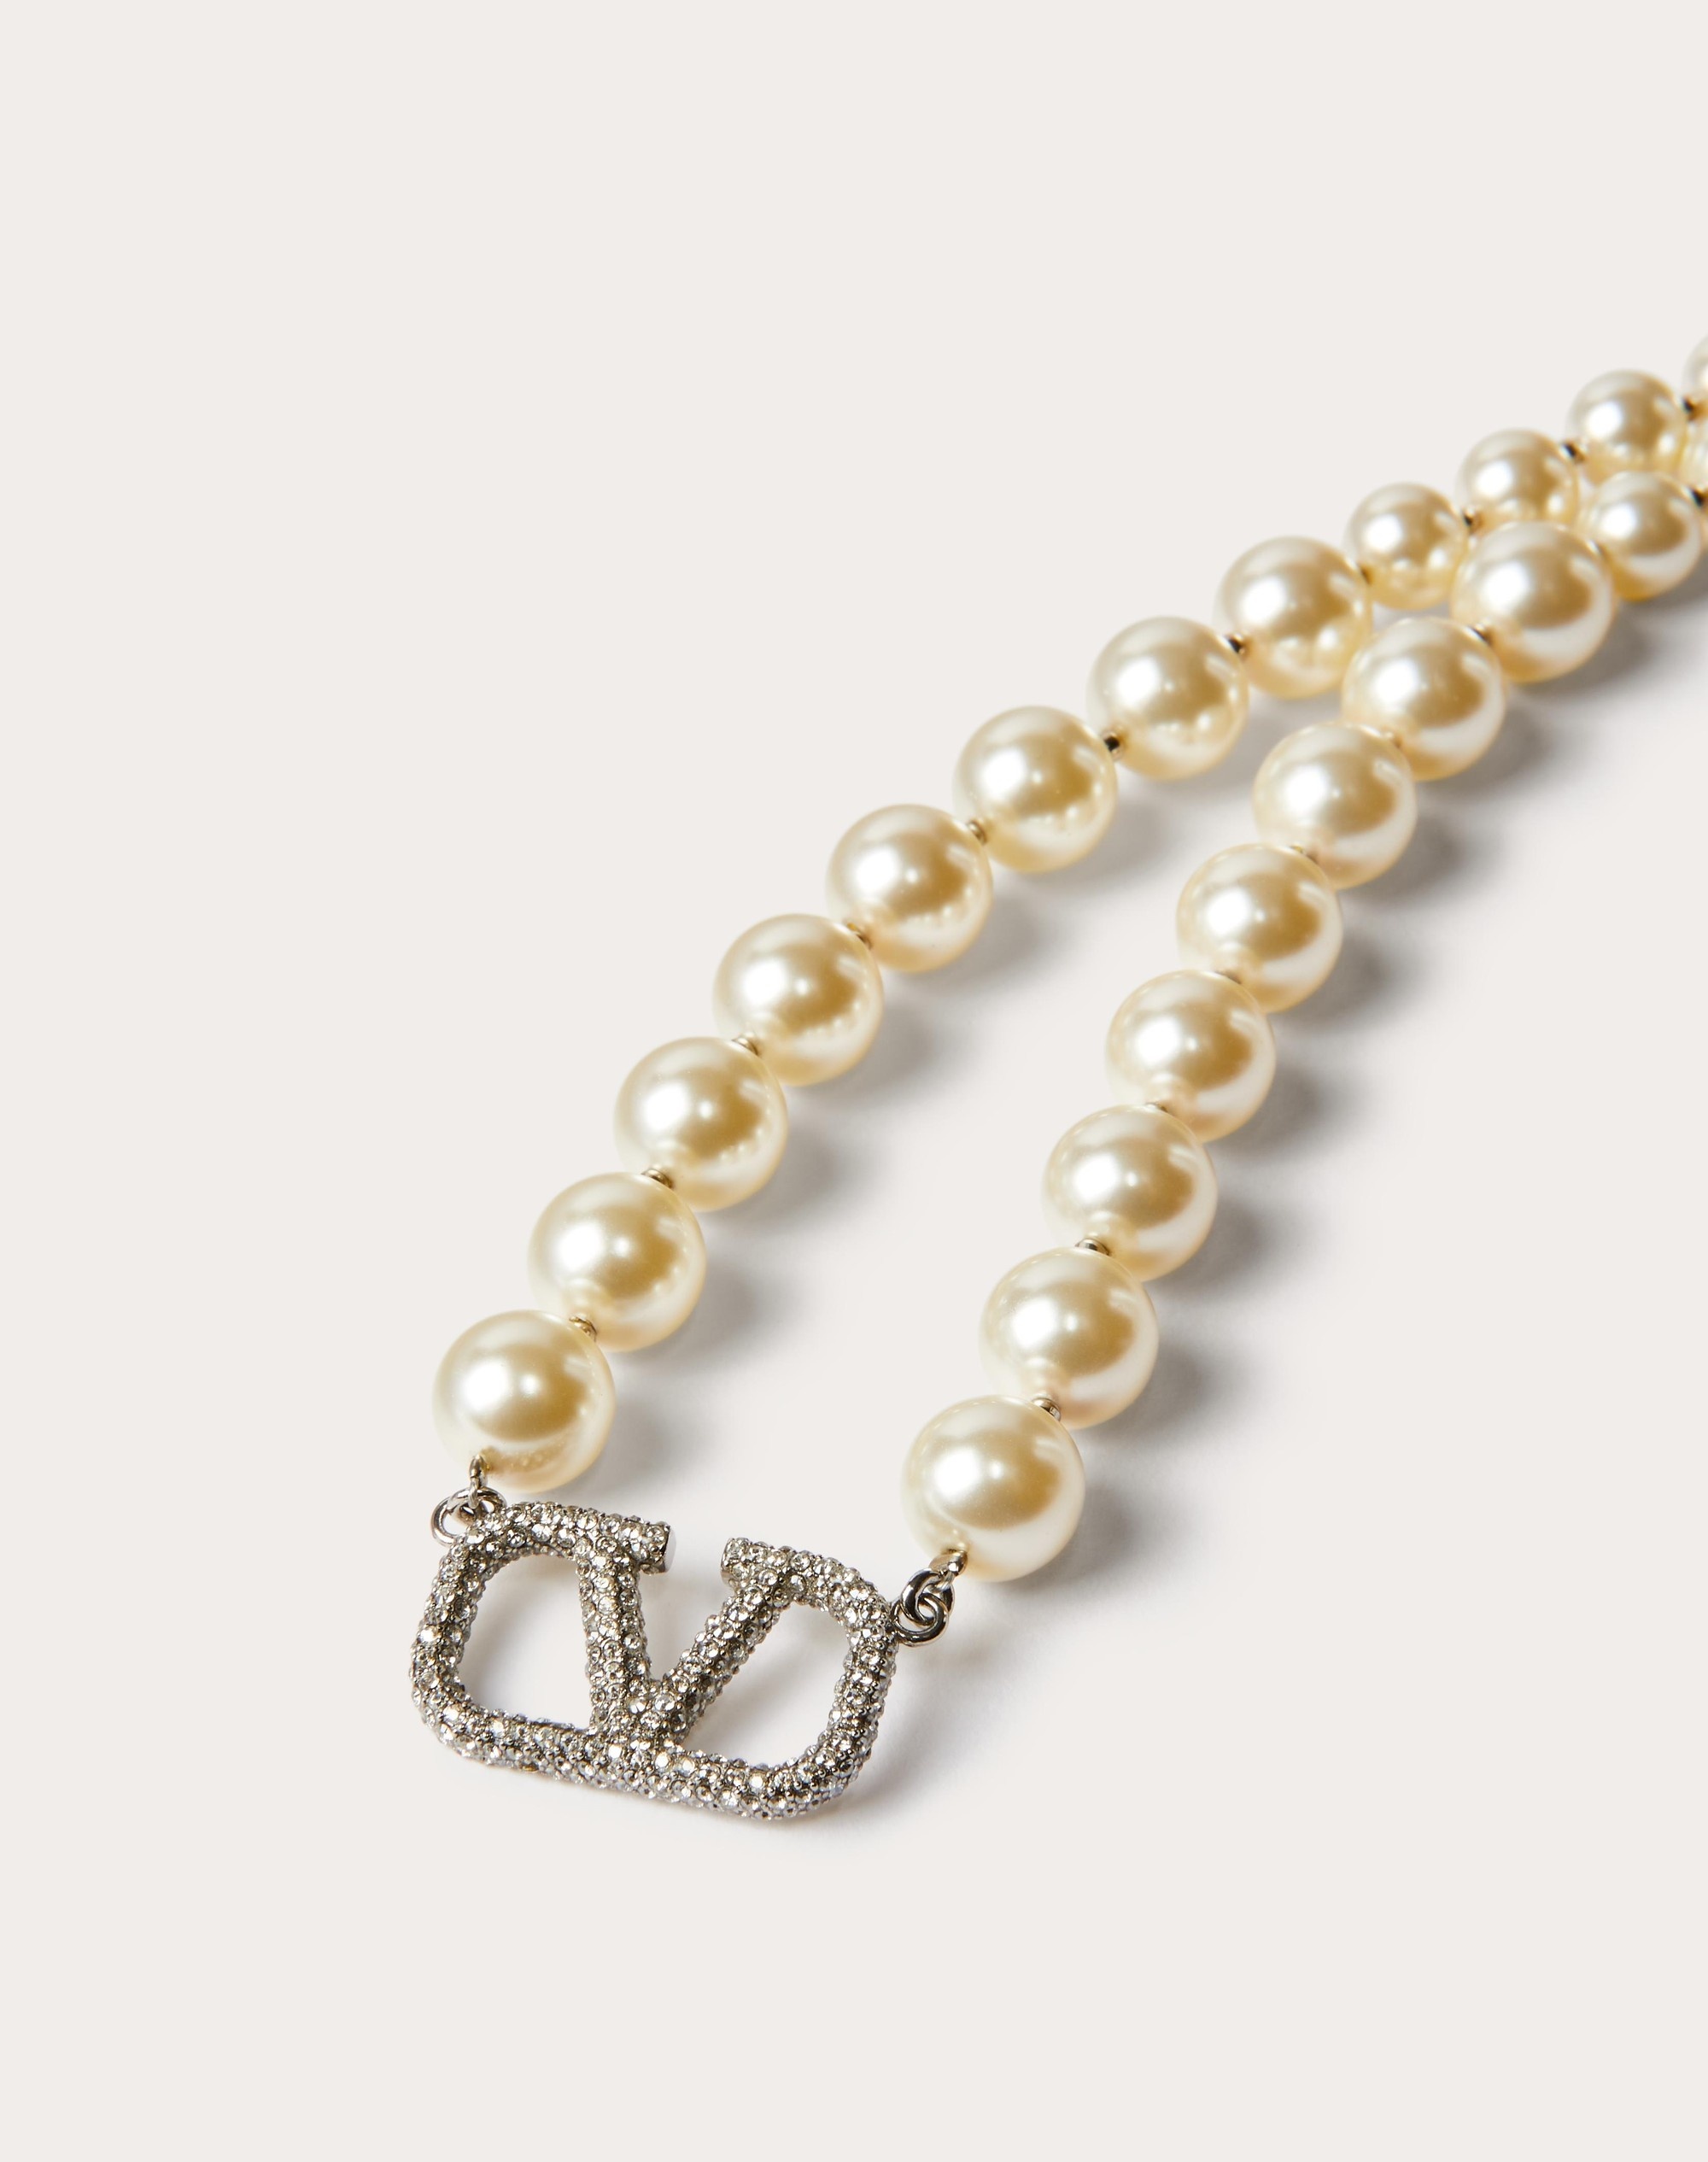 VLOGO SIGNATURE NECKLACE WITH PEARLS AND SWAROVSKI® CRYSTALS - 2